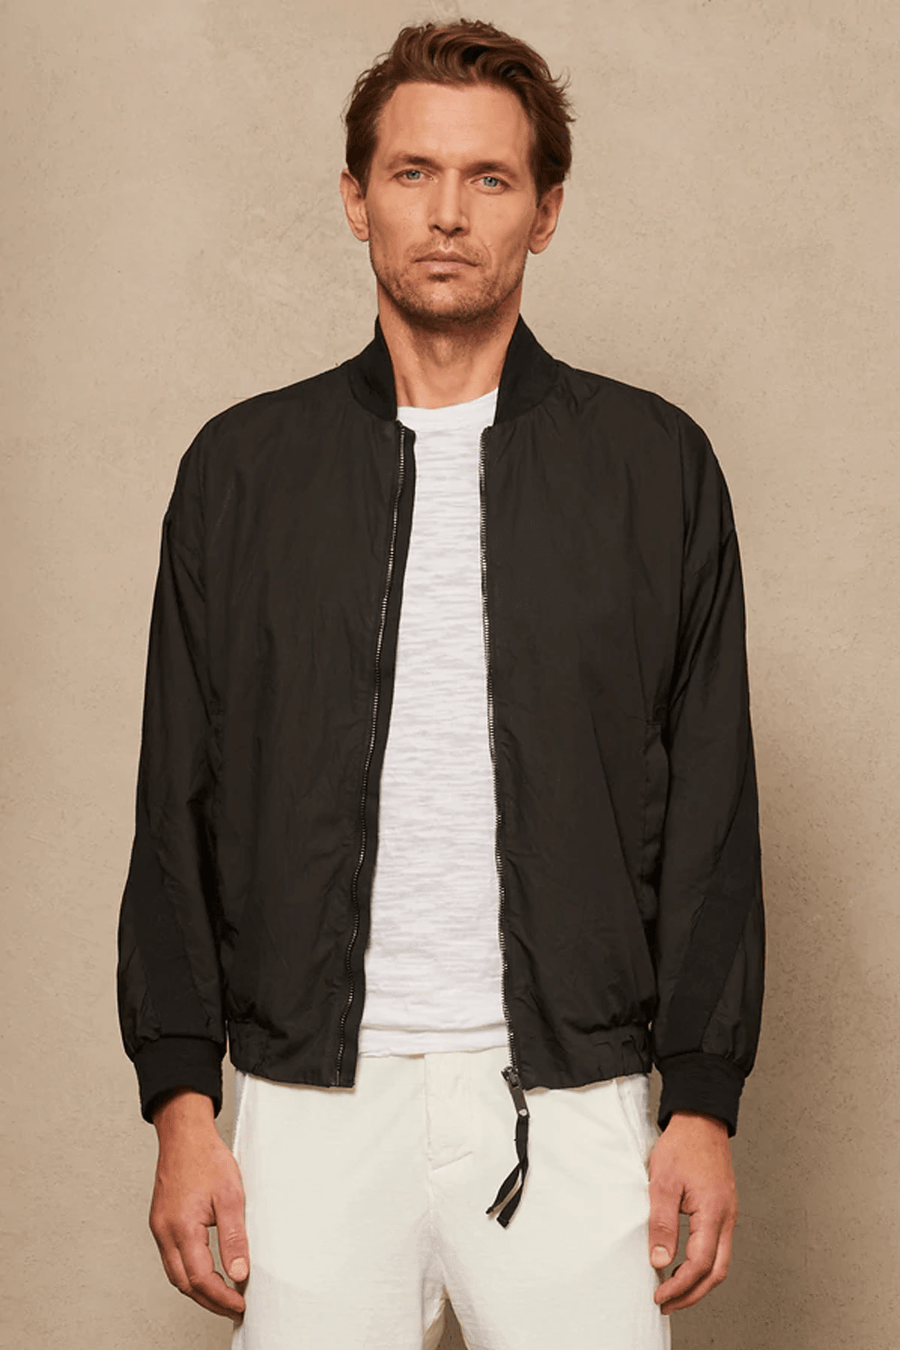 Buy the Transit Zip-Up Bomber Jacket in Black at Intro. Spend £50 for free UK delivery. Official stockists. We ship worldwide.